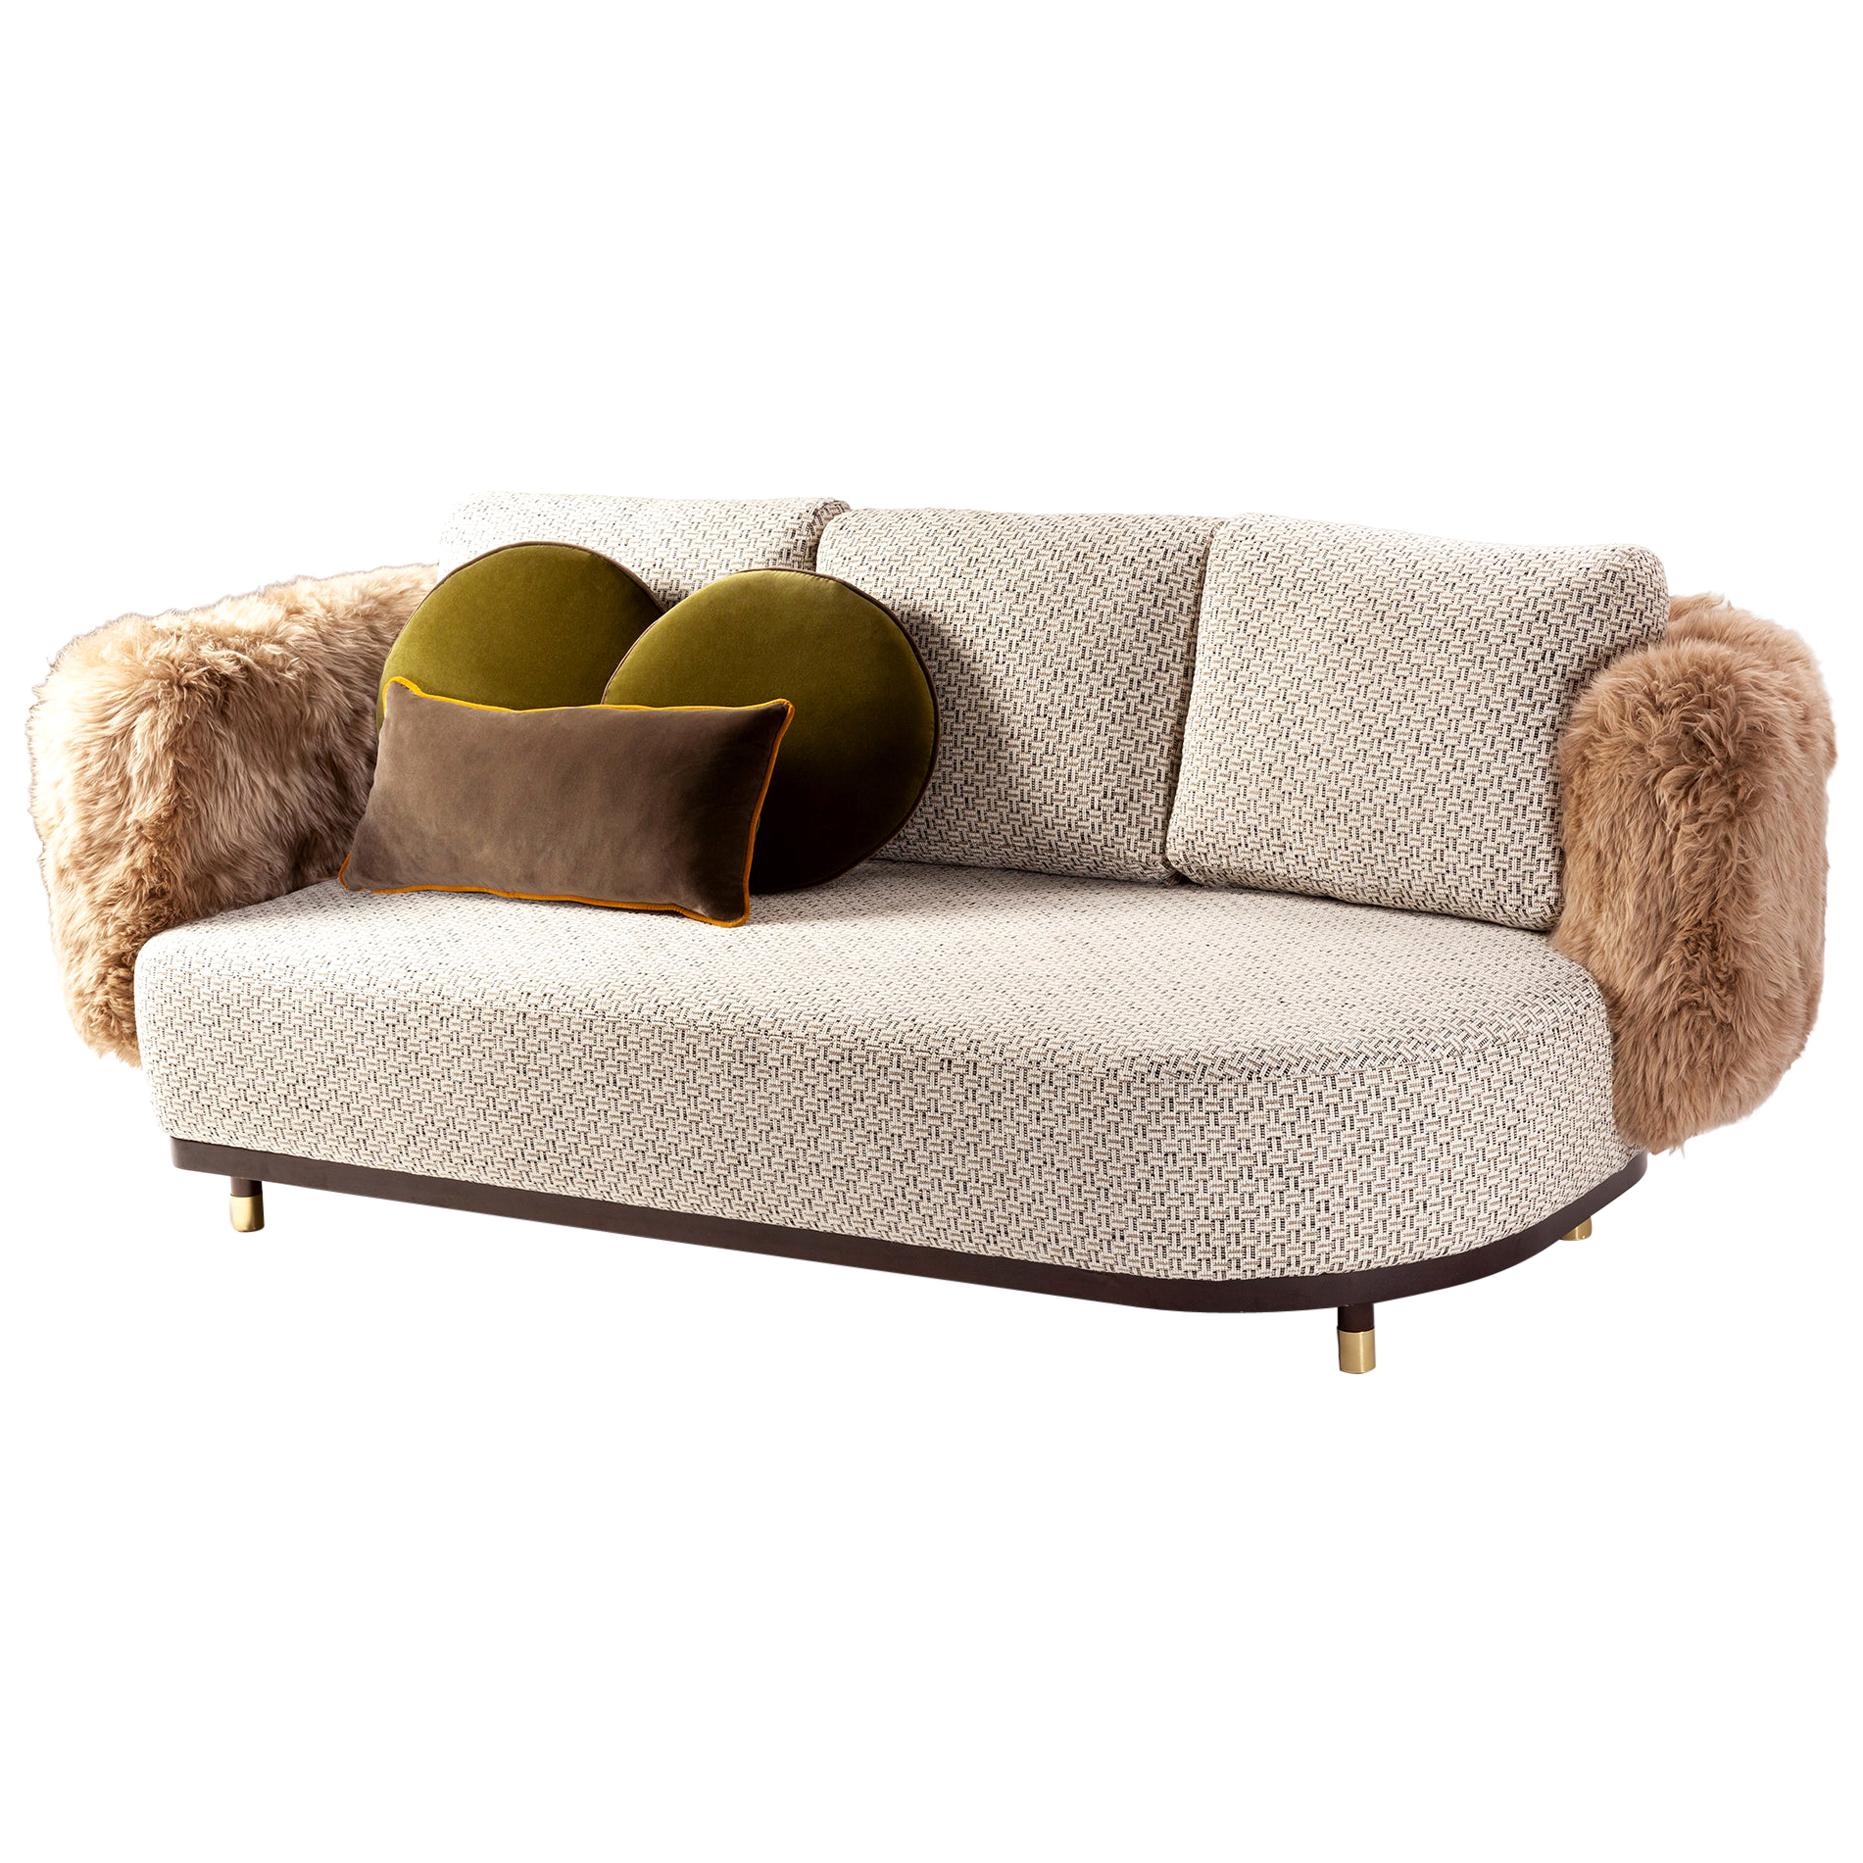 Dooq Sofa Settee with Weaved Texture and Lamb Fur Single Man, in Stock